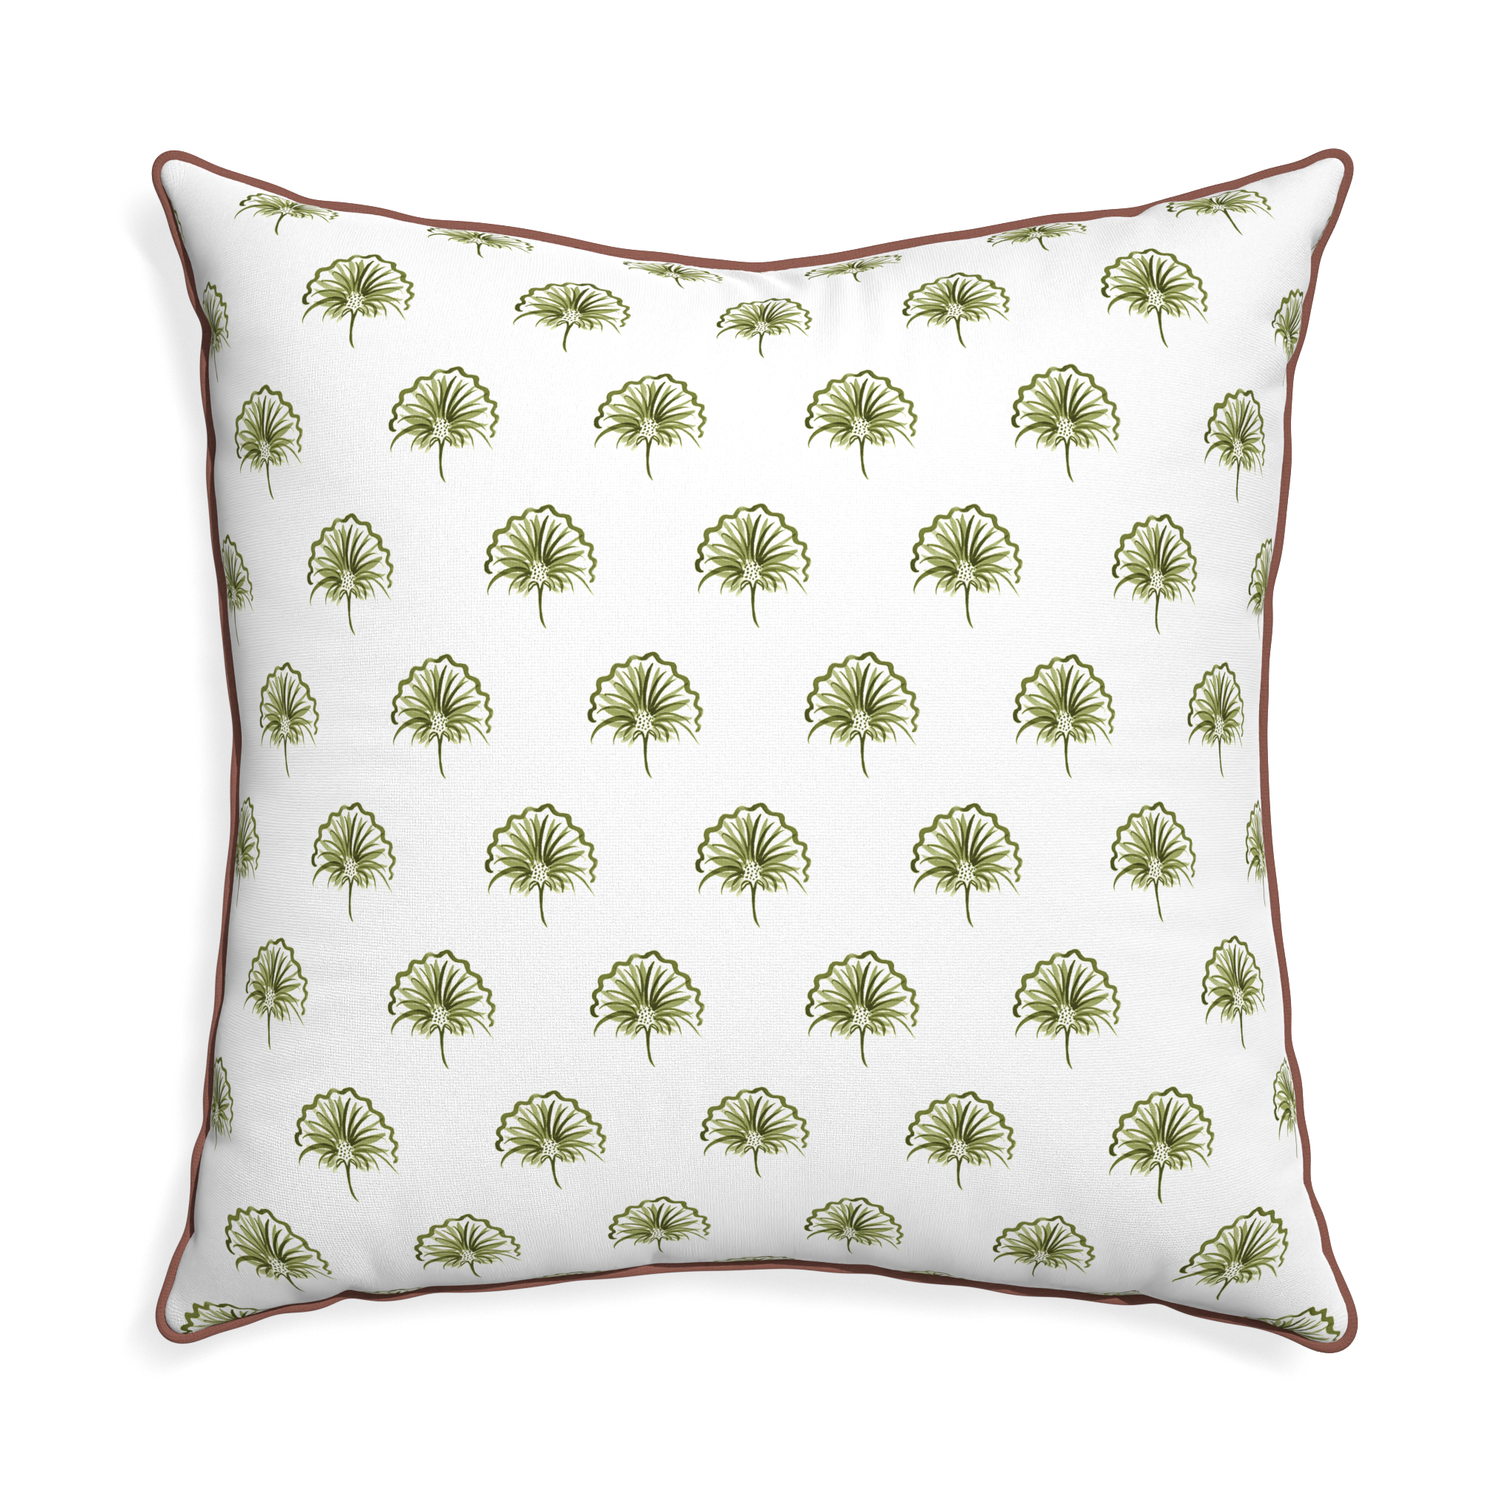 Euro-sham penelope moss custom pillow with w piping on white background